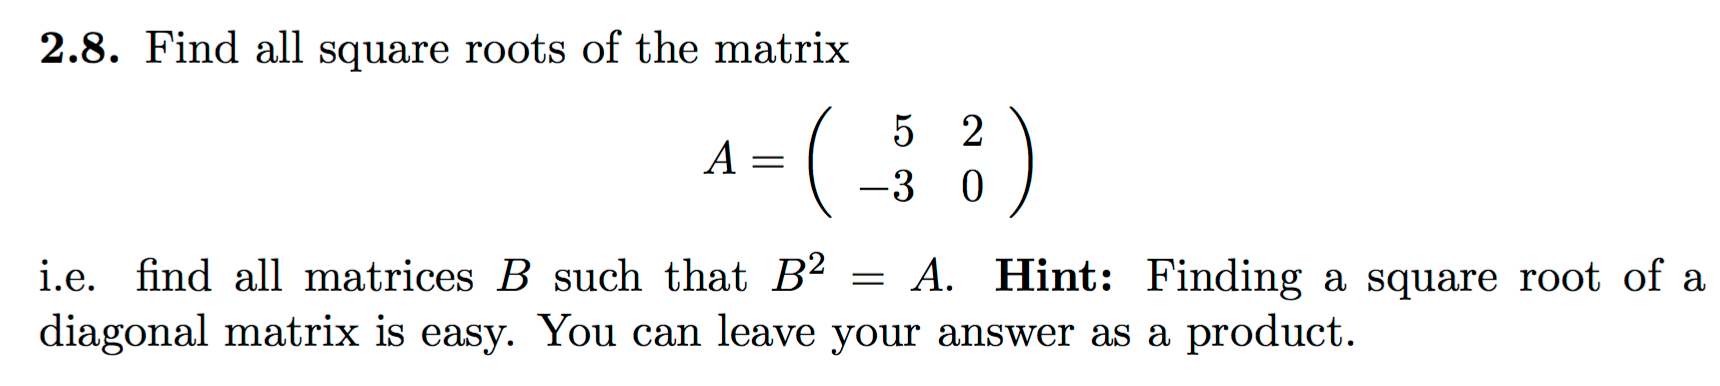 solved-find-all-square-roots-of-the-matrix-a-5-2-3-0-chegg